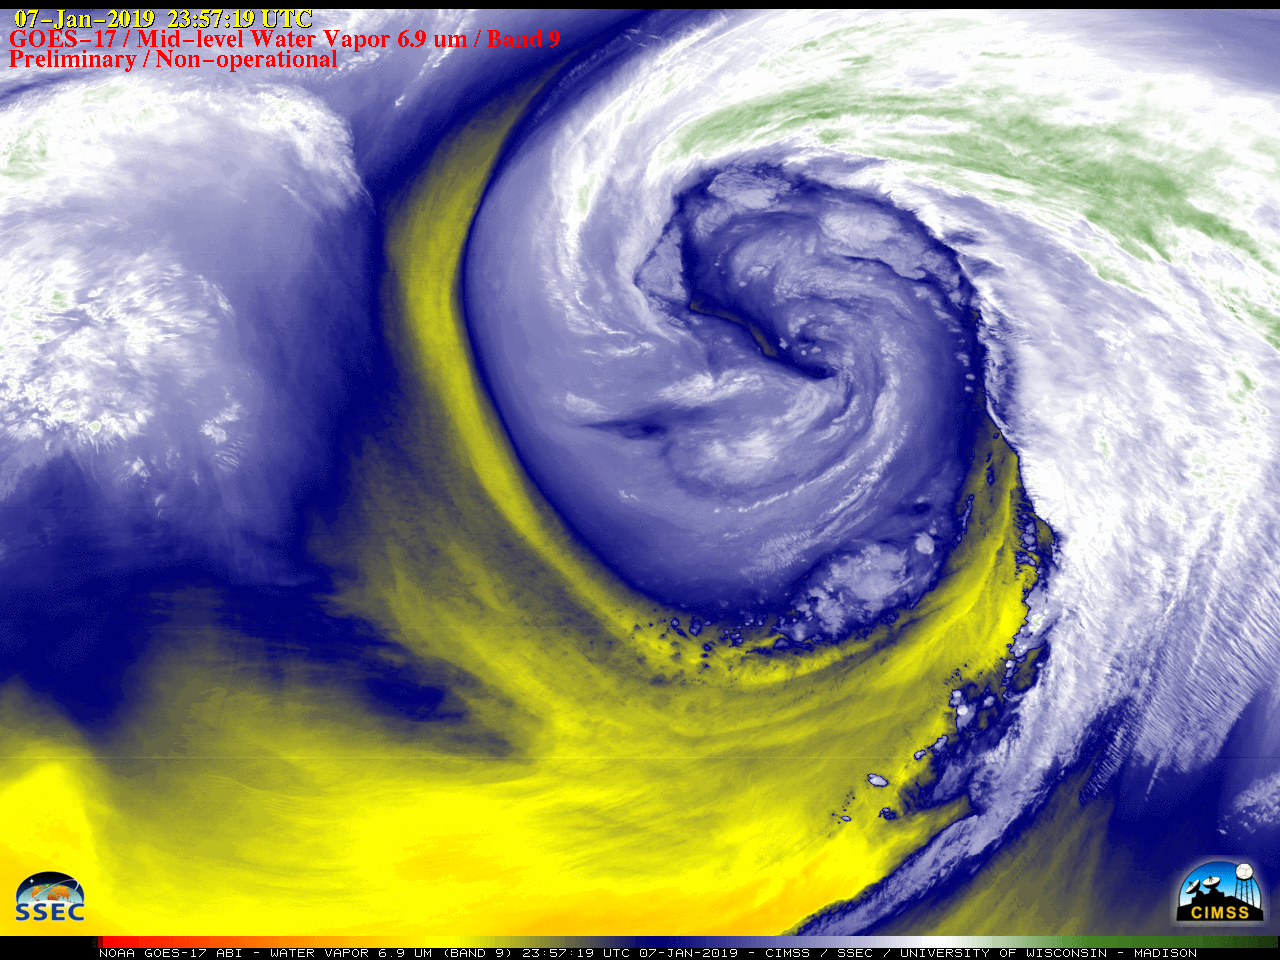 GOES-17 Low-level (7.3 µm), Mid-level (6.9 µm) and Upper-level (6.2 µm) Water Vapor images [click to play MP4 animation]